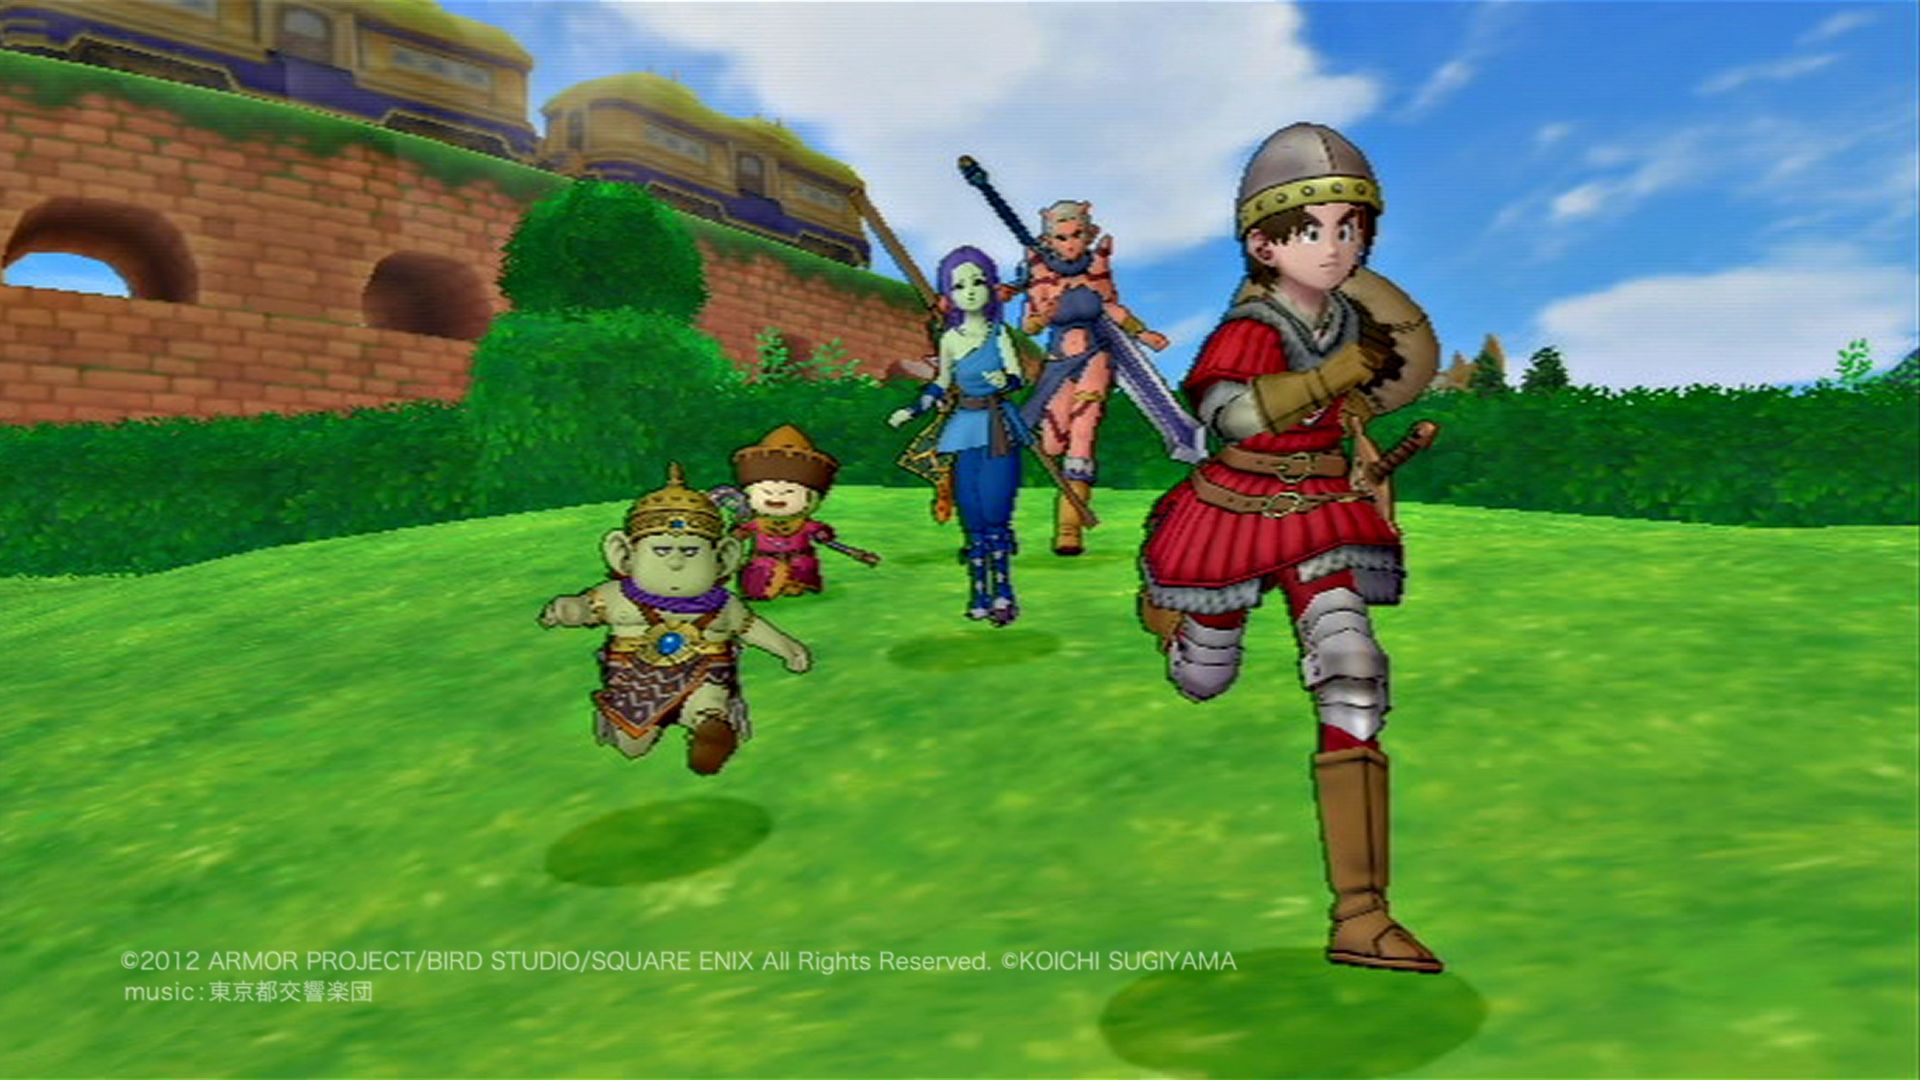 Dragon Quest X Uses Streaming Tech to Come to 3DS in Japan - GameSpot